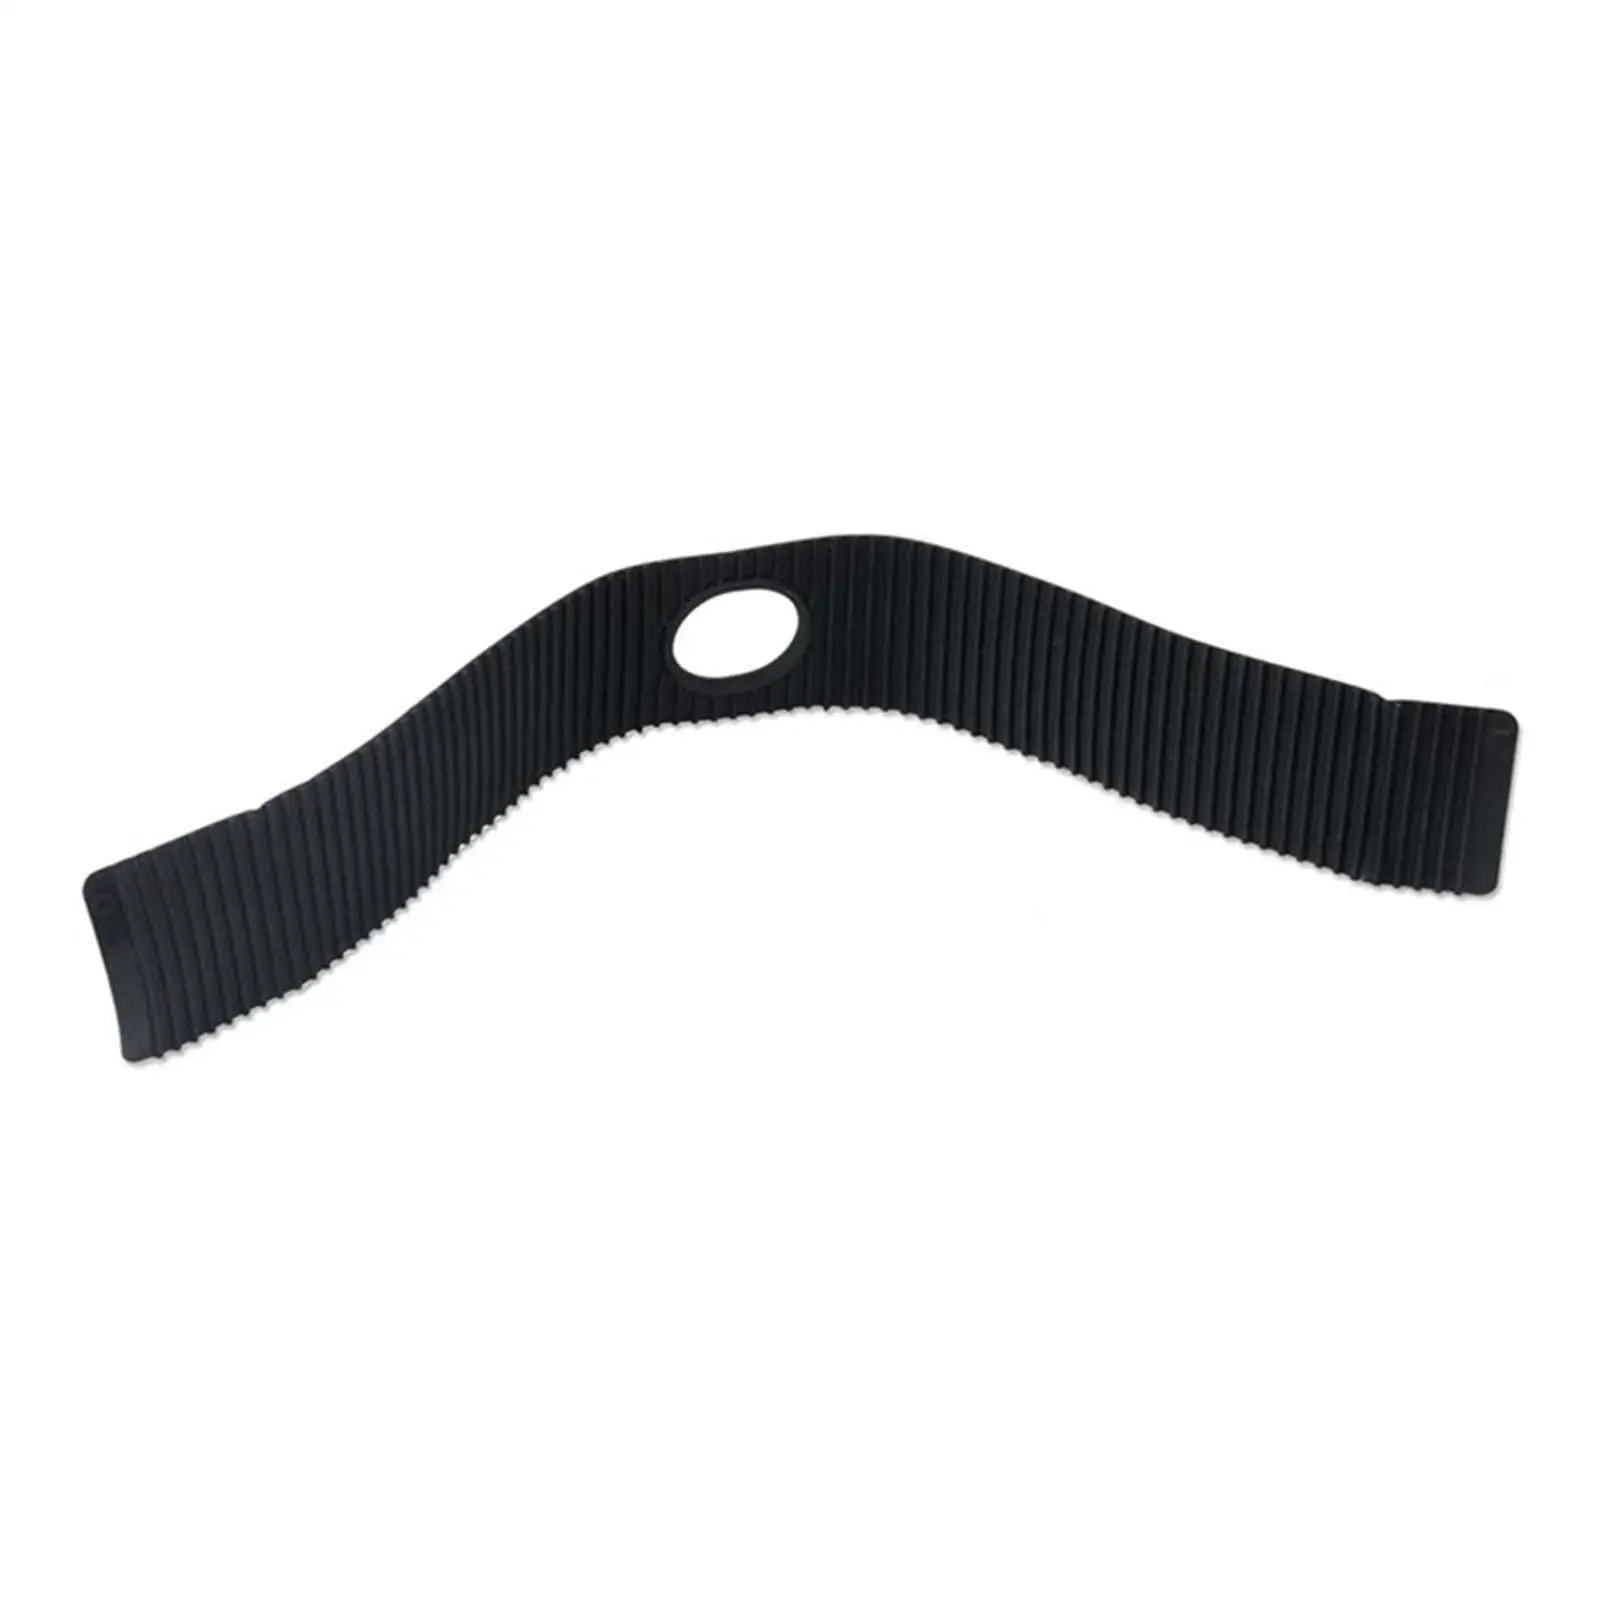 center Console Automatic Transmission Shift Slider Bar 1J0713277 Dustproof Dust Strip for New Replacement Vehicle